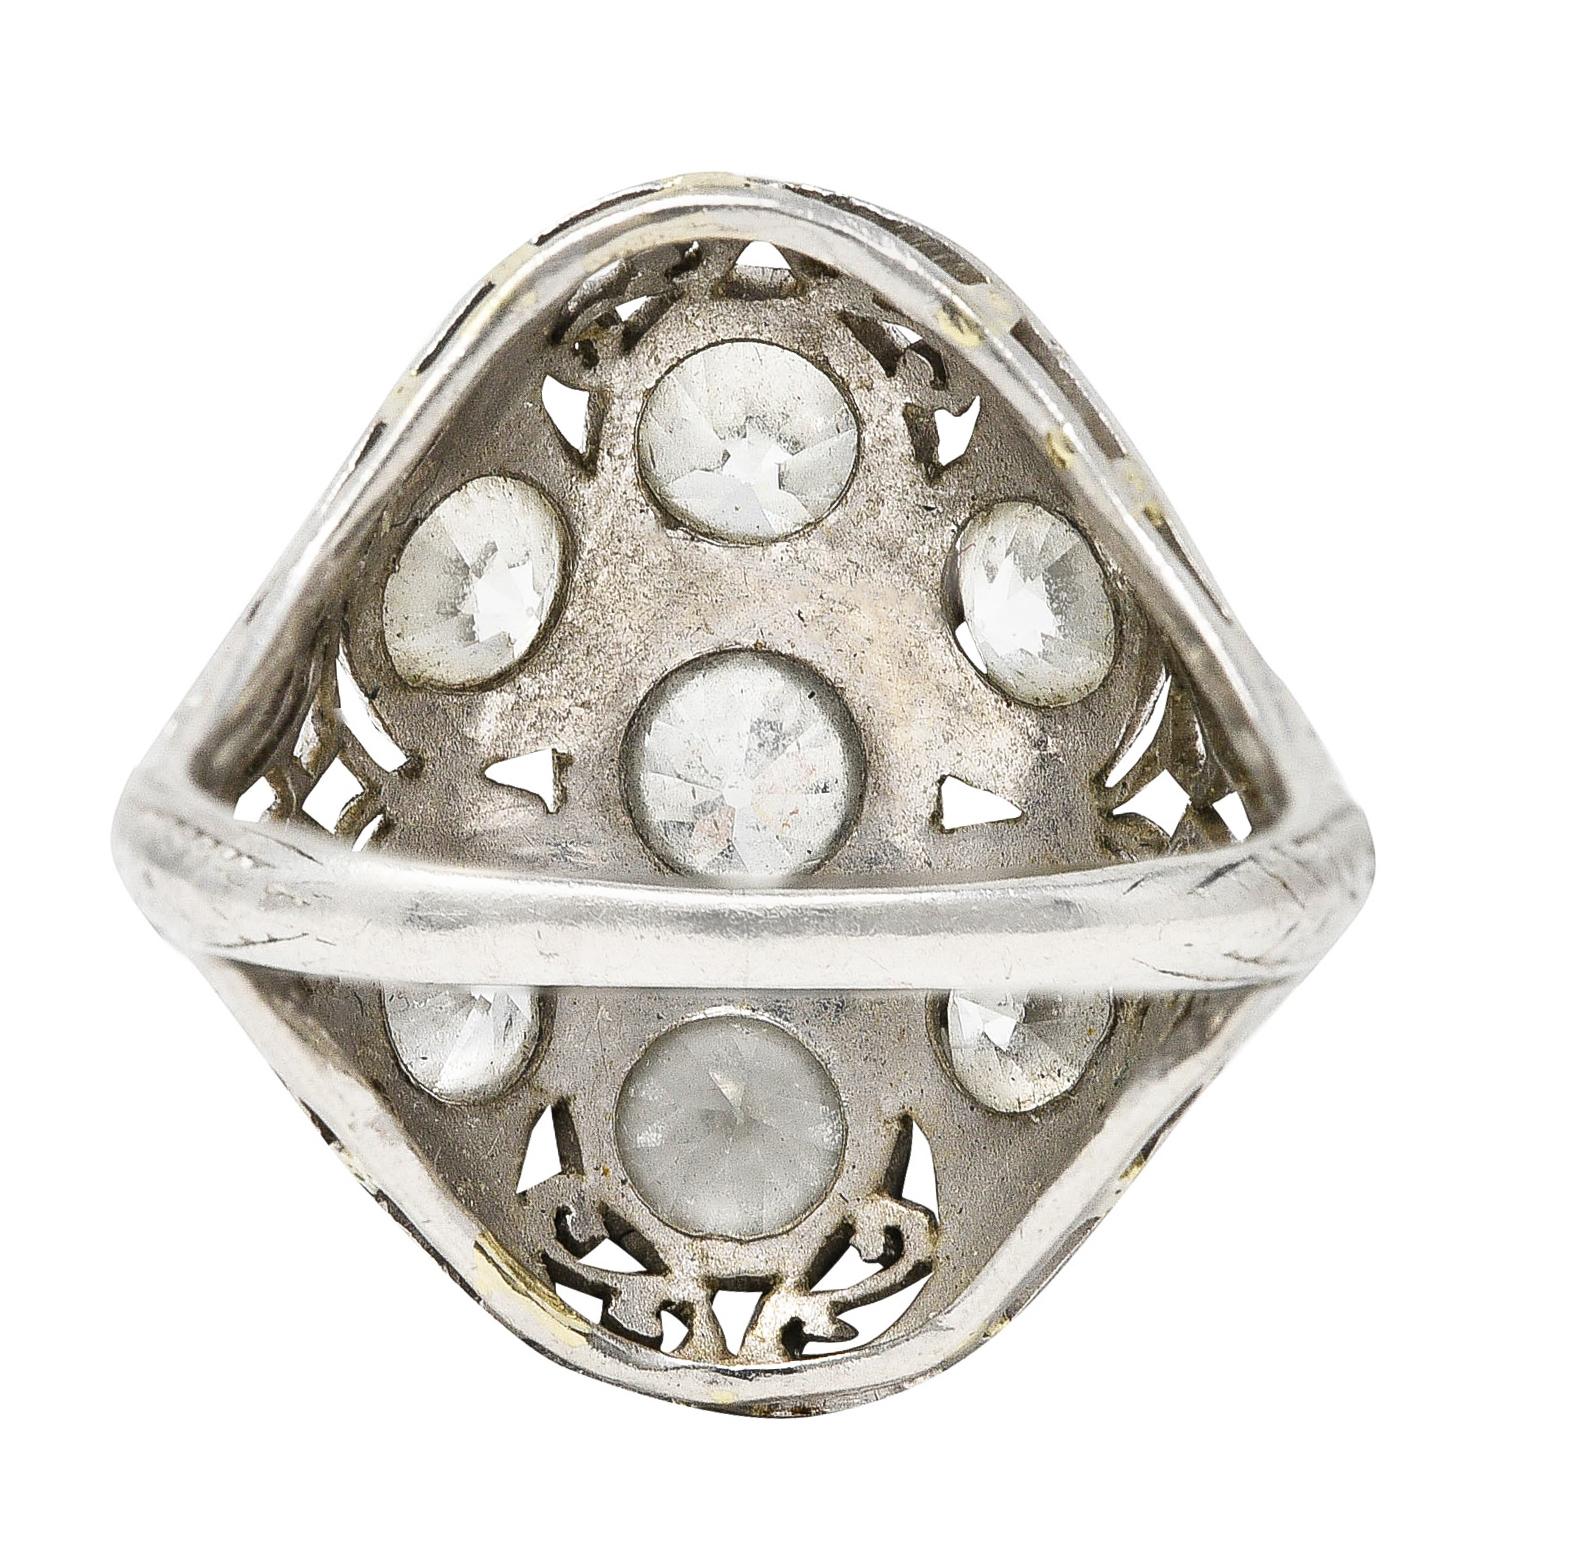 Edwardian 1.93 Carat Old European Cut Diamond Platinum Scrolling Antique Ring In Excellent Condition For Sale In Philadelphia, PA